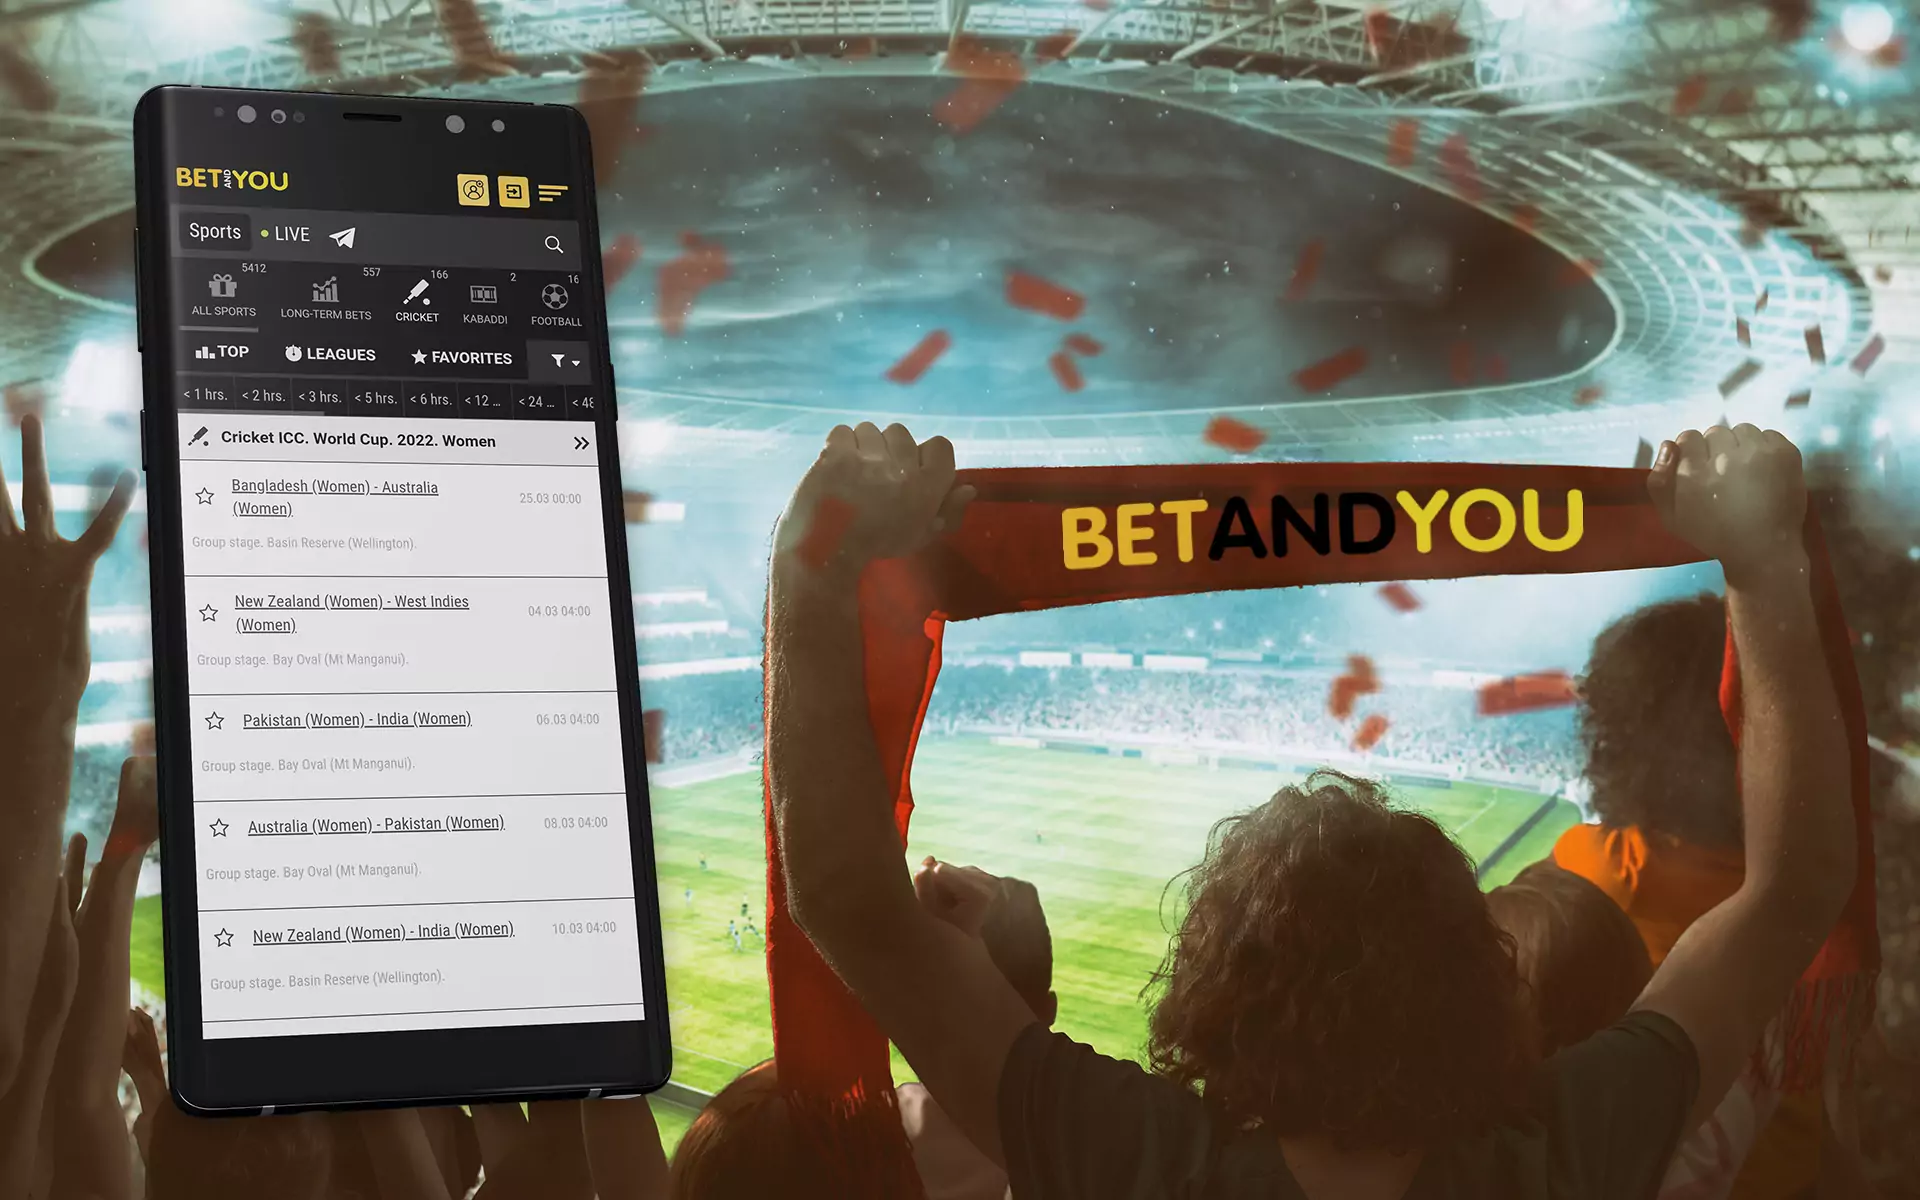 Betandyou has bets on dozens of sports available in the Betandyou App.